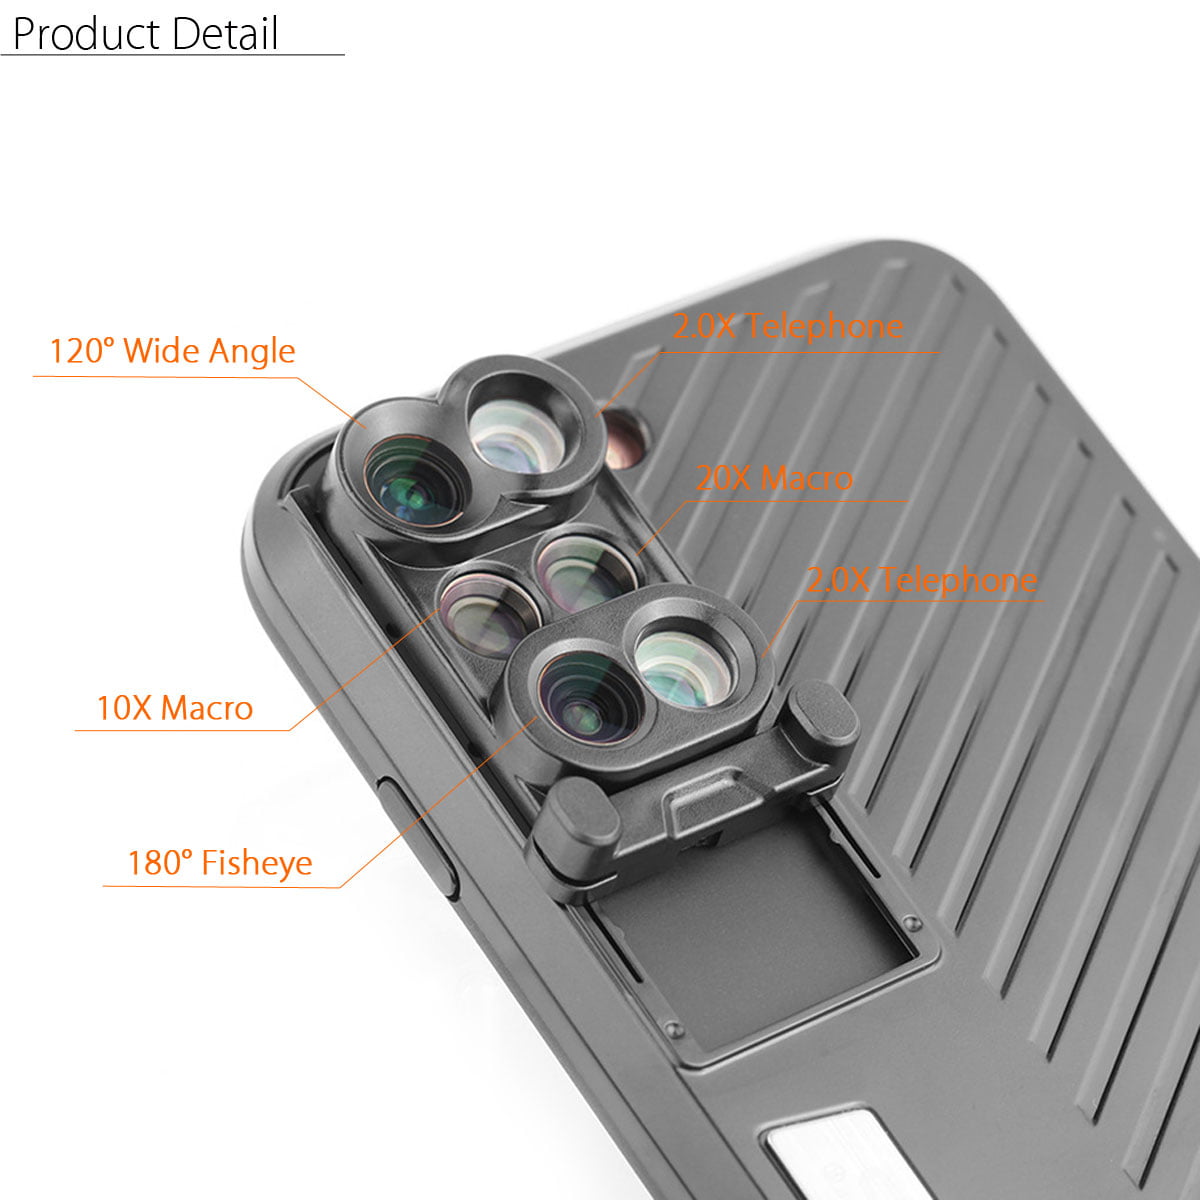 Fisheye Macro and Super Macro Double Layer Protection Wide-Angle Telephoto iPhone 7 Plus 6-in-1 Rotatable Dual Optics Lens System Case Black